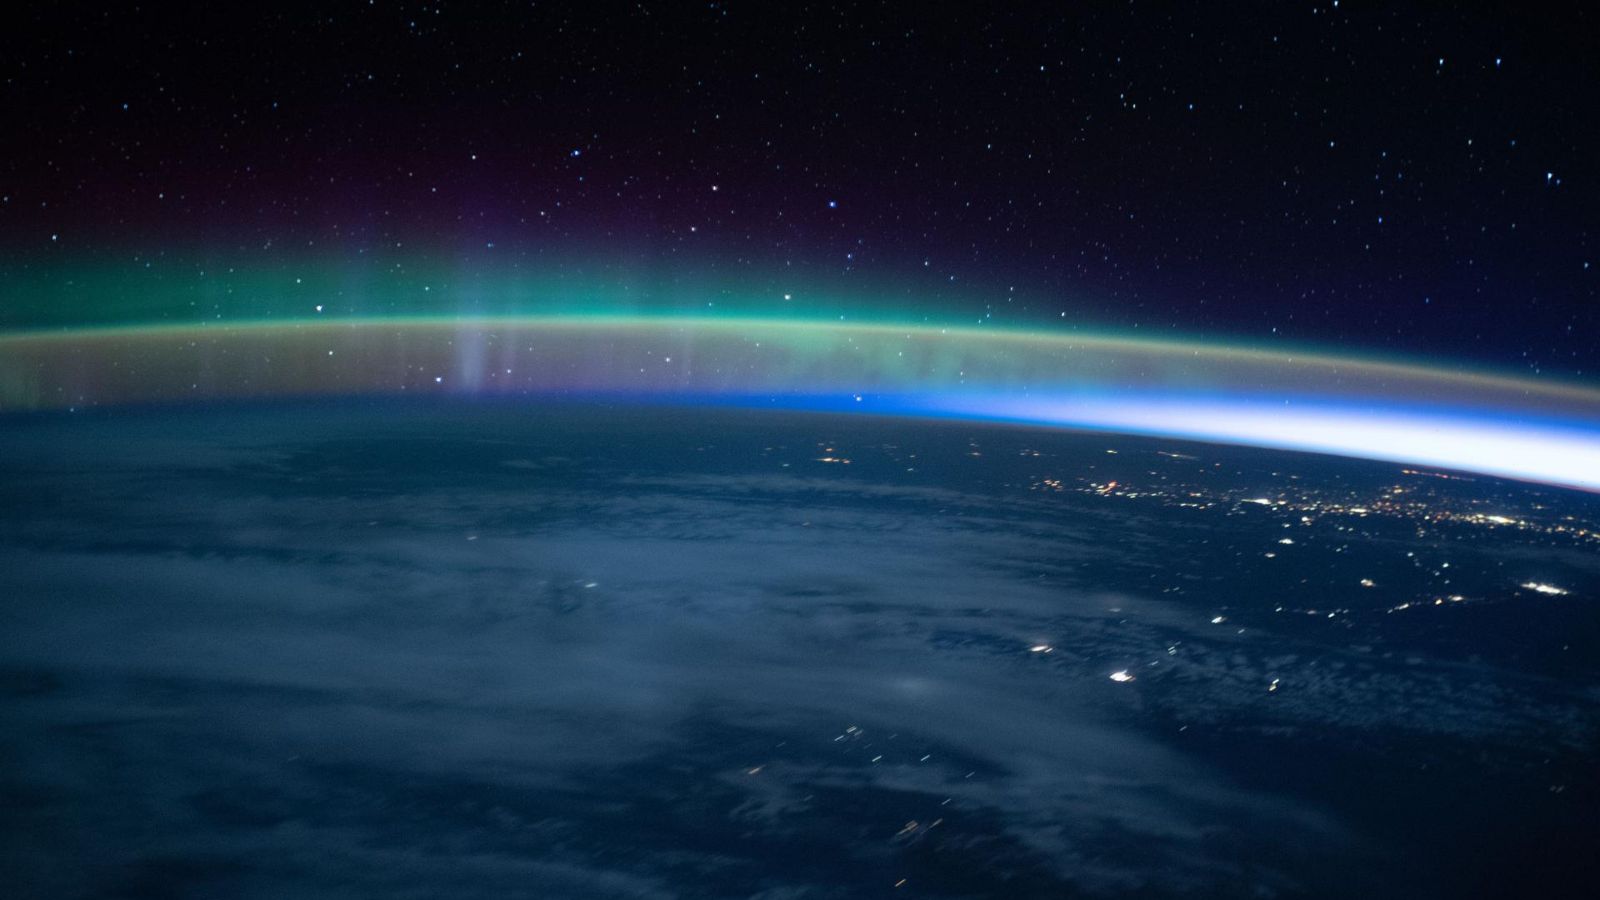 An image of the earth from the international space station